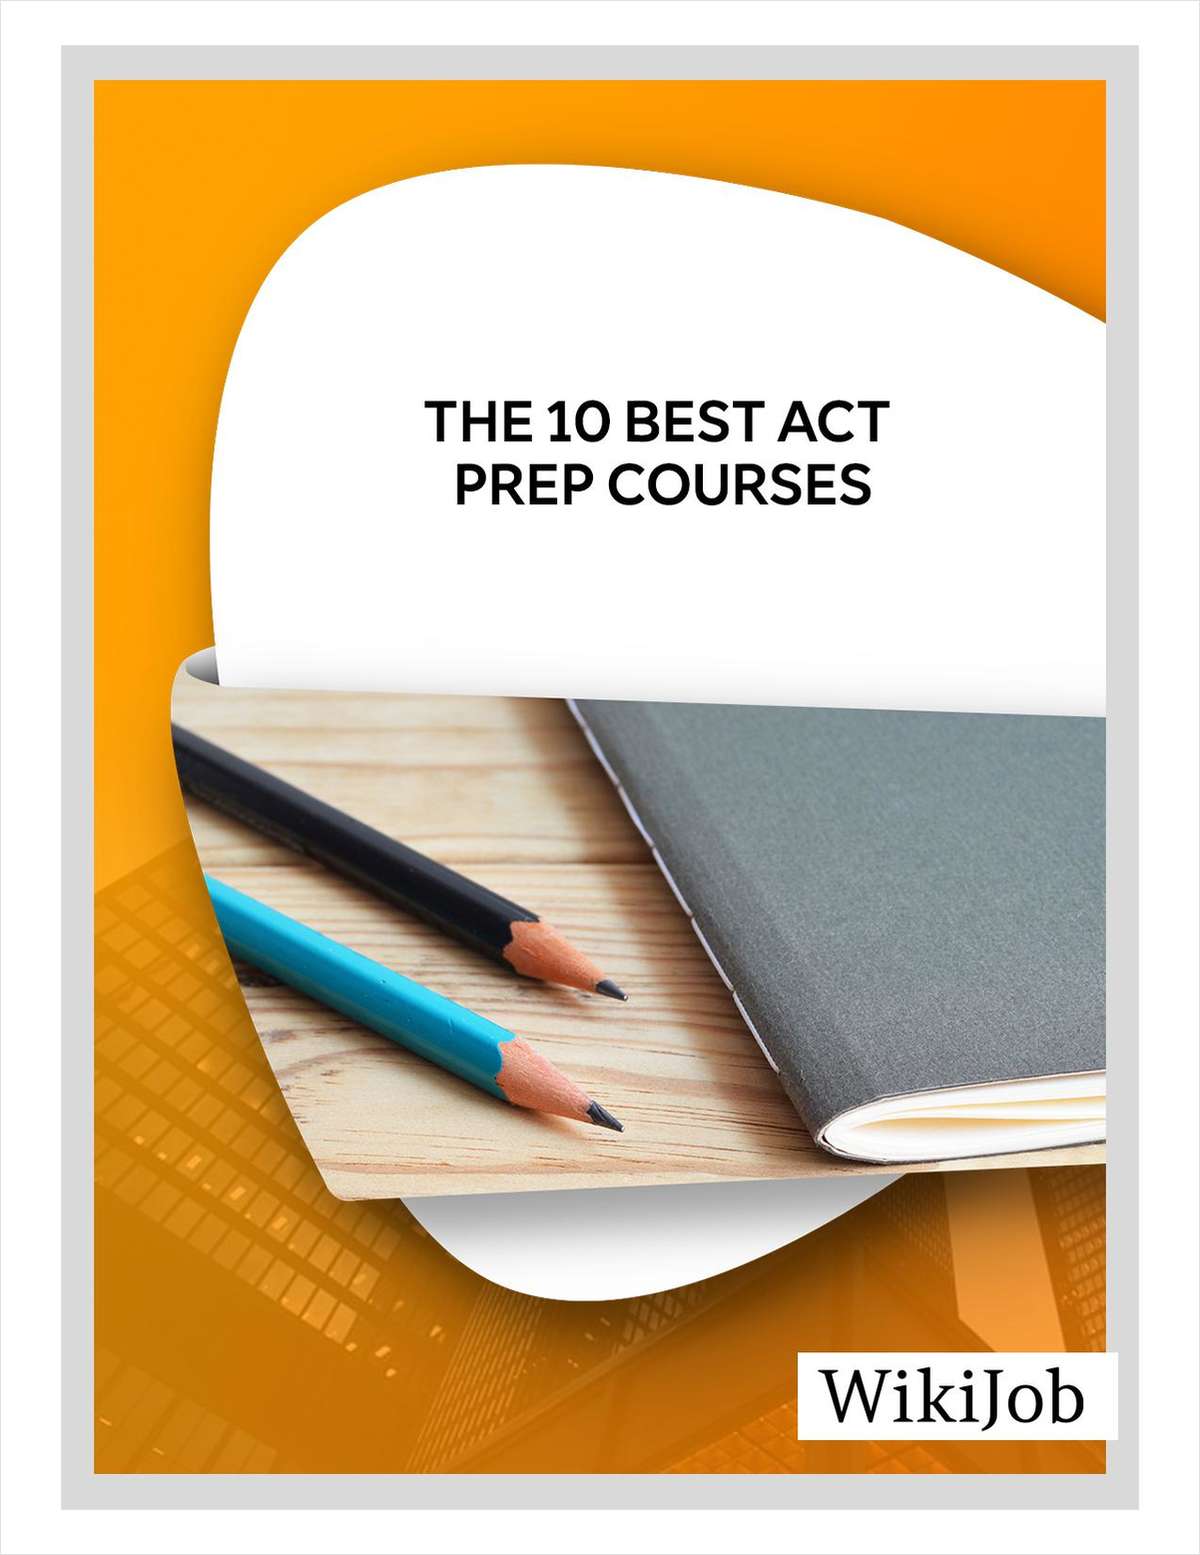 The 10 Best ACT Prep Courses